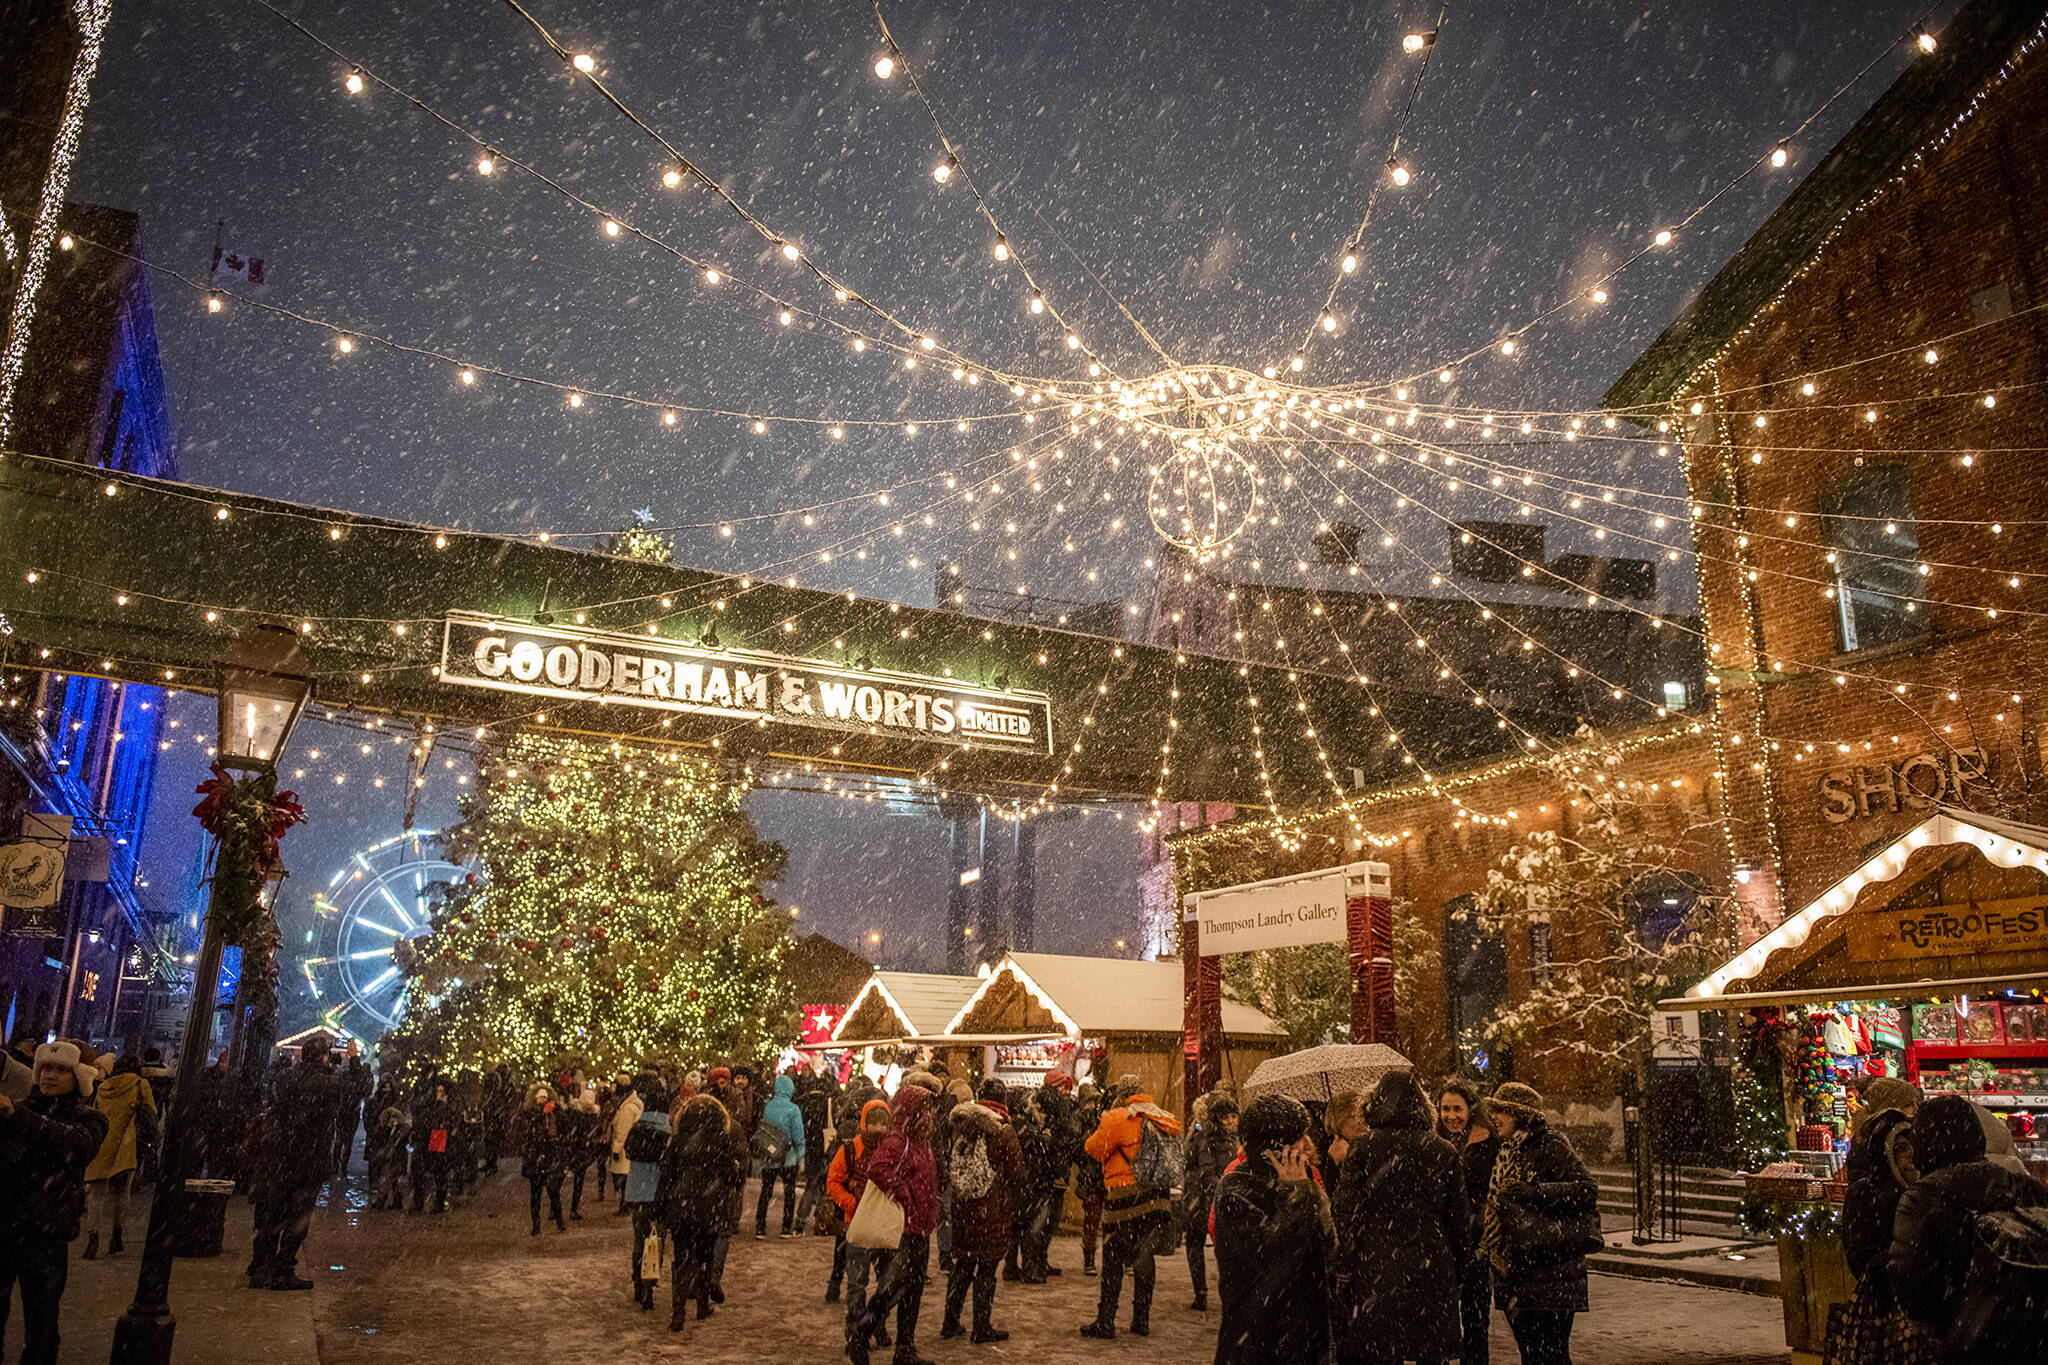 This is what the Toronto Christmas Market looks like this year